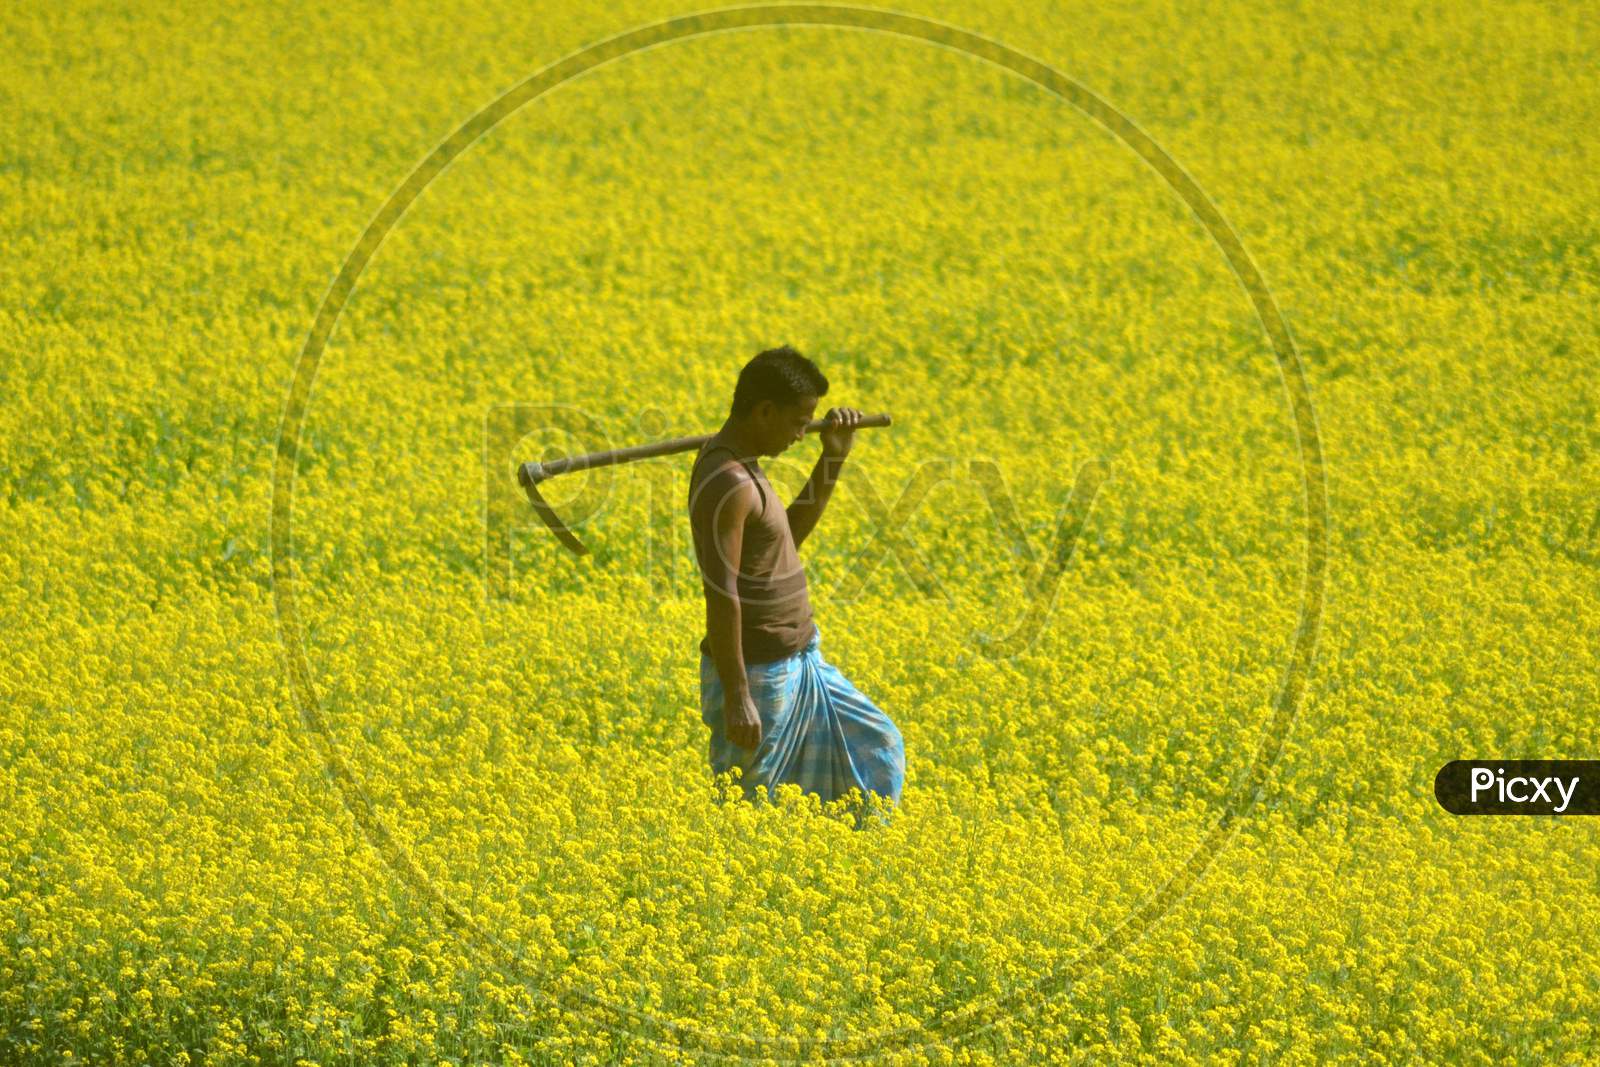 Farmer In an Mustard Field With Yellow Blooming Flowers in Morigaon, Assam